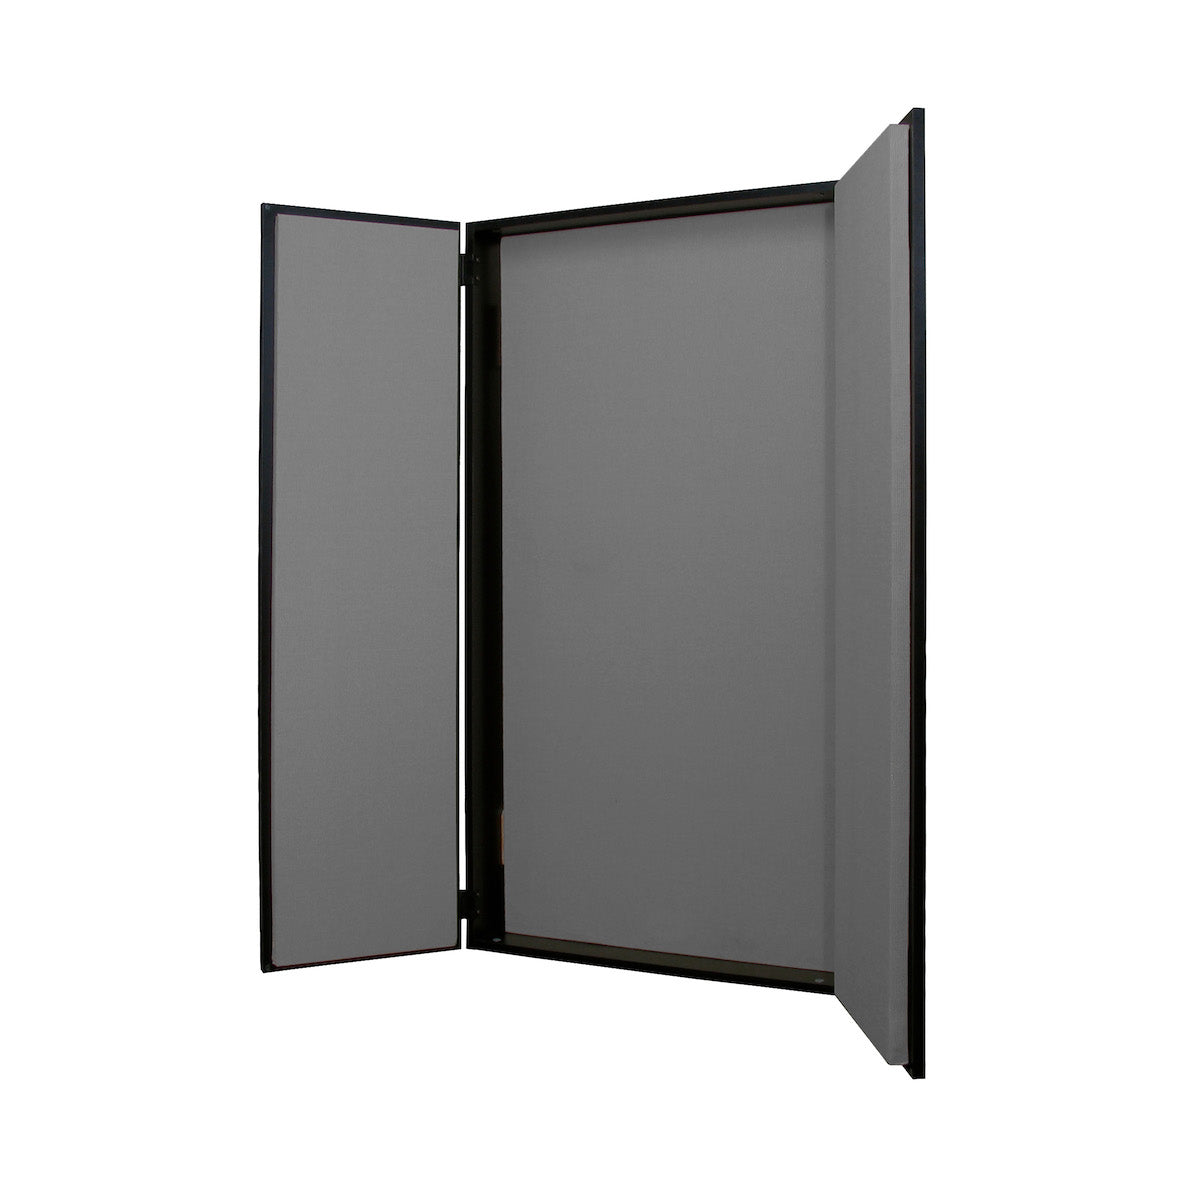 Primacoustic FlexiBooth - Wall Mount Vocal Booth, grey